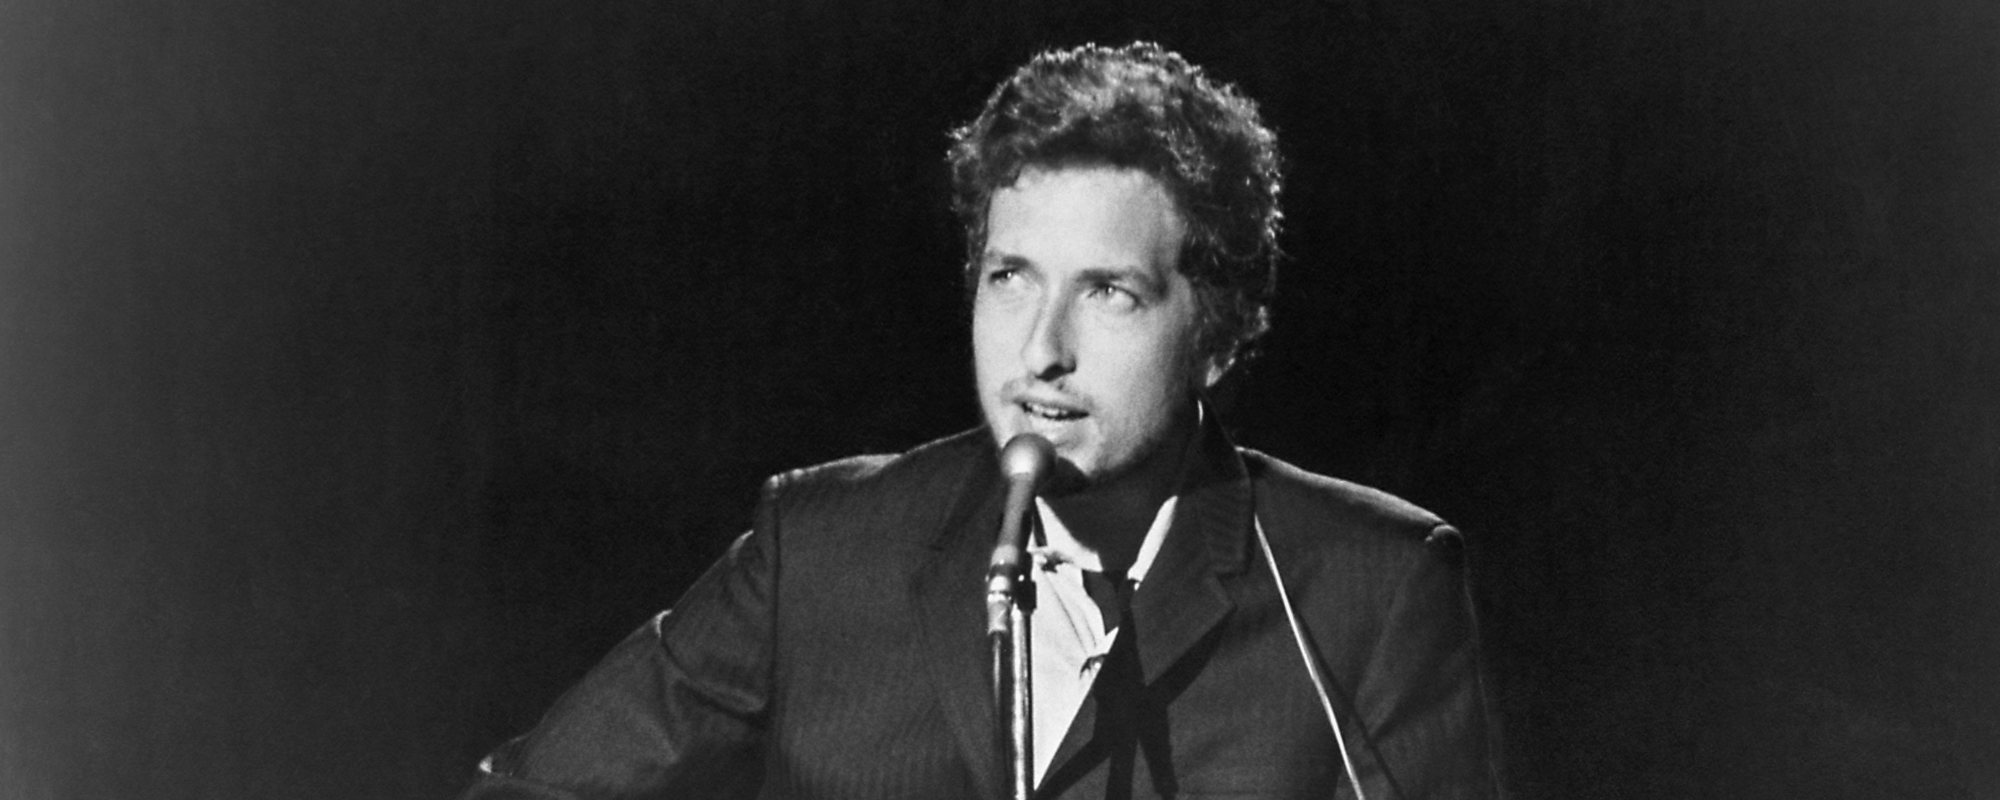 From Surly Bard to Country Crooner: The Meaning Behind Bob Dylan’s “Lay, Lady, Lay”